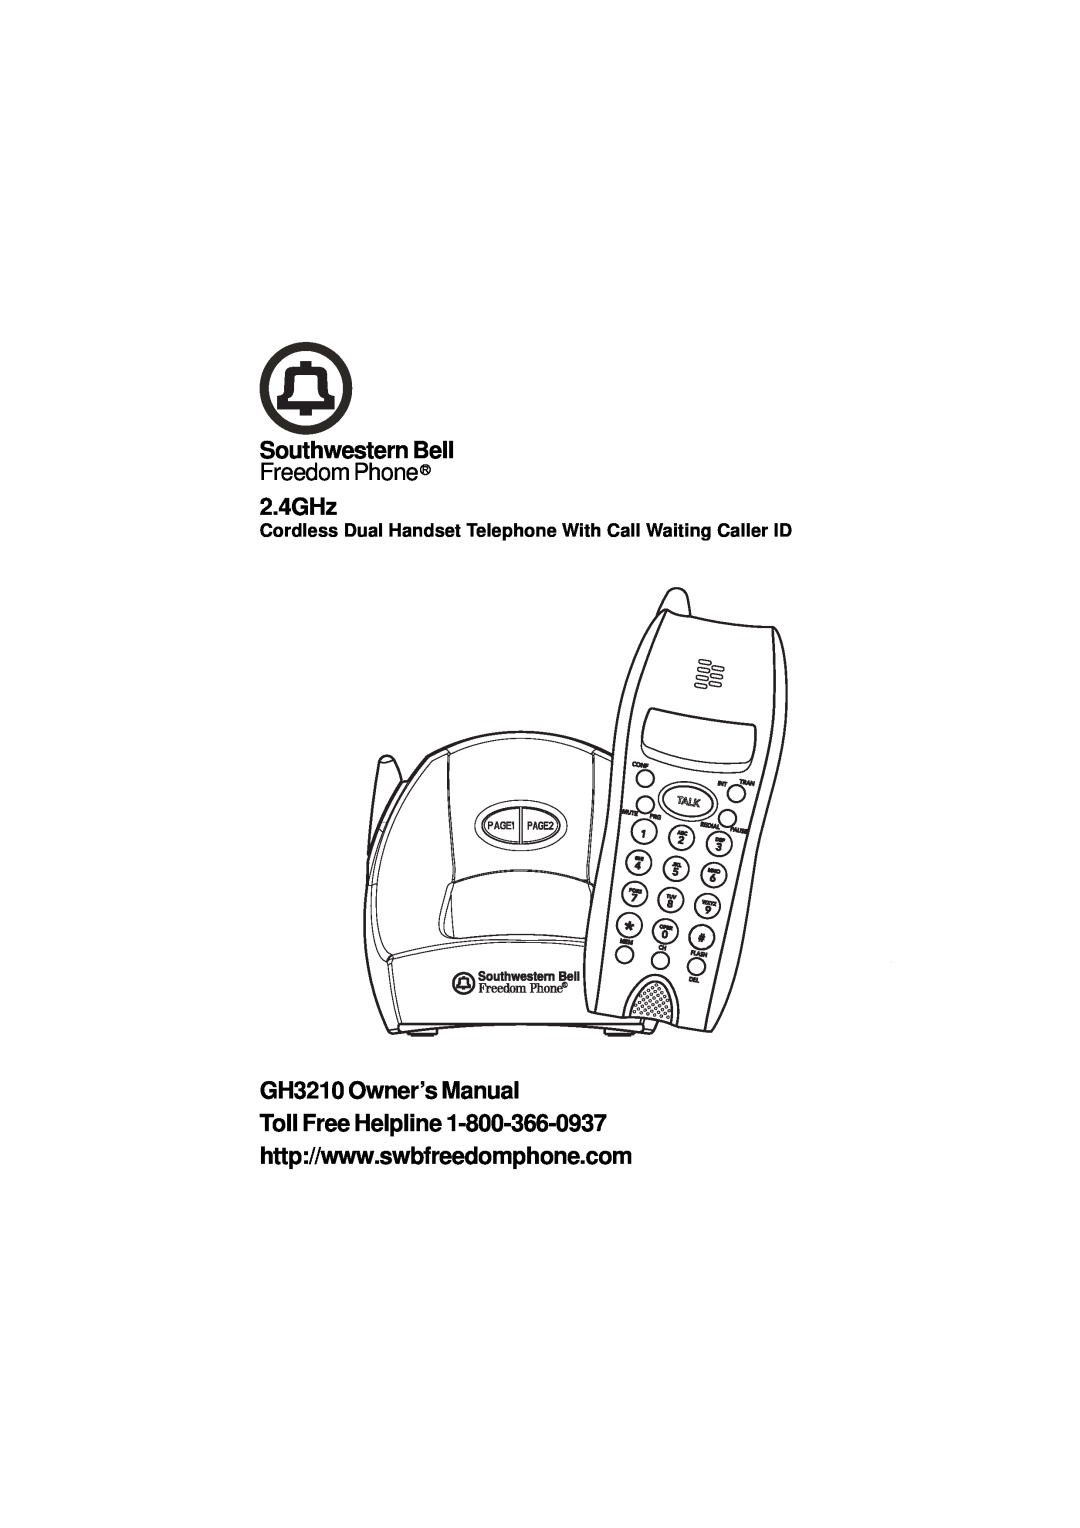 Southwestern Bell GH3210 owner manual Cordless Dual Handset Telephone With Call Waiting Caller ID, Southwestern Bell 